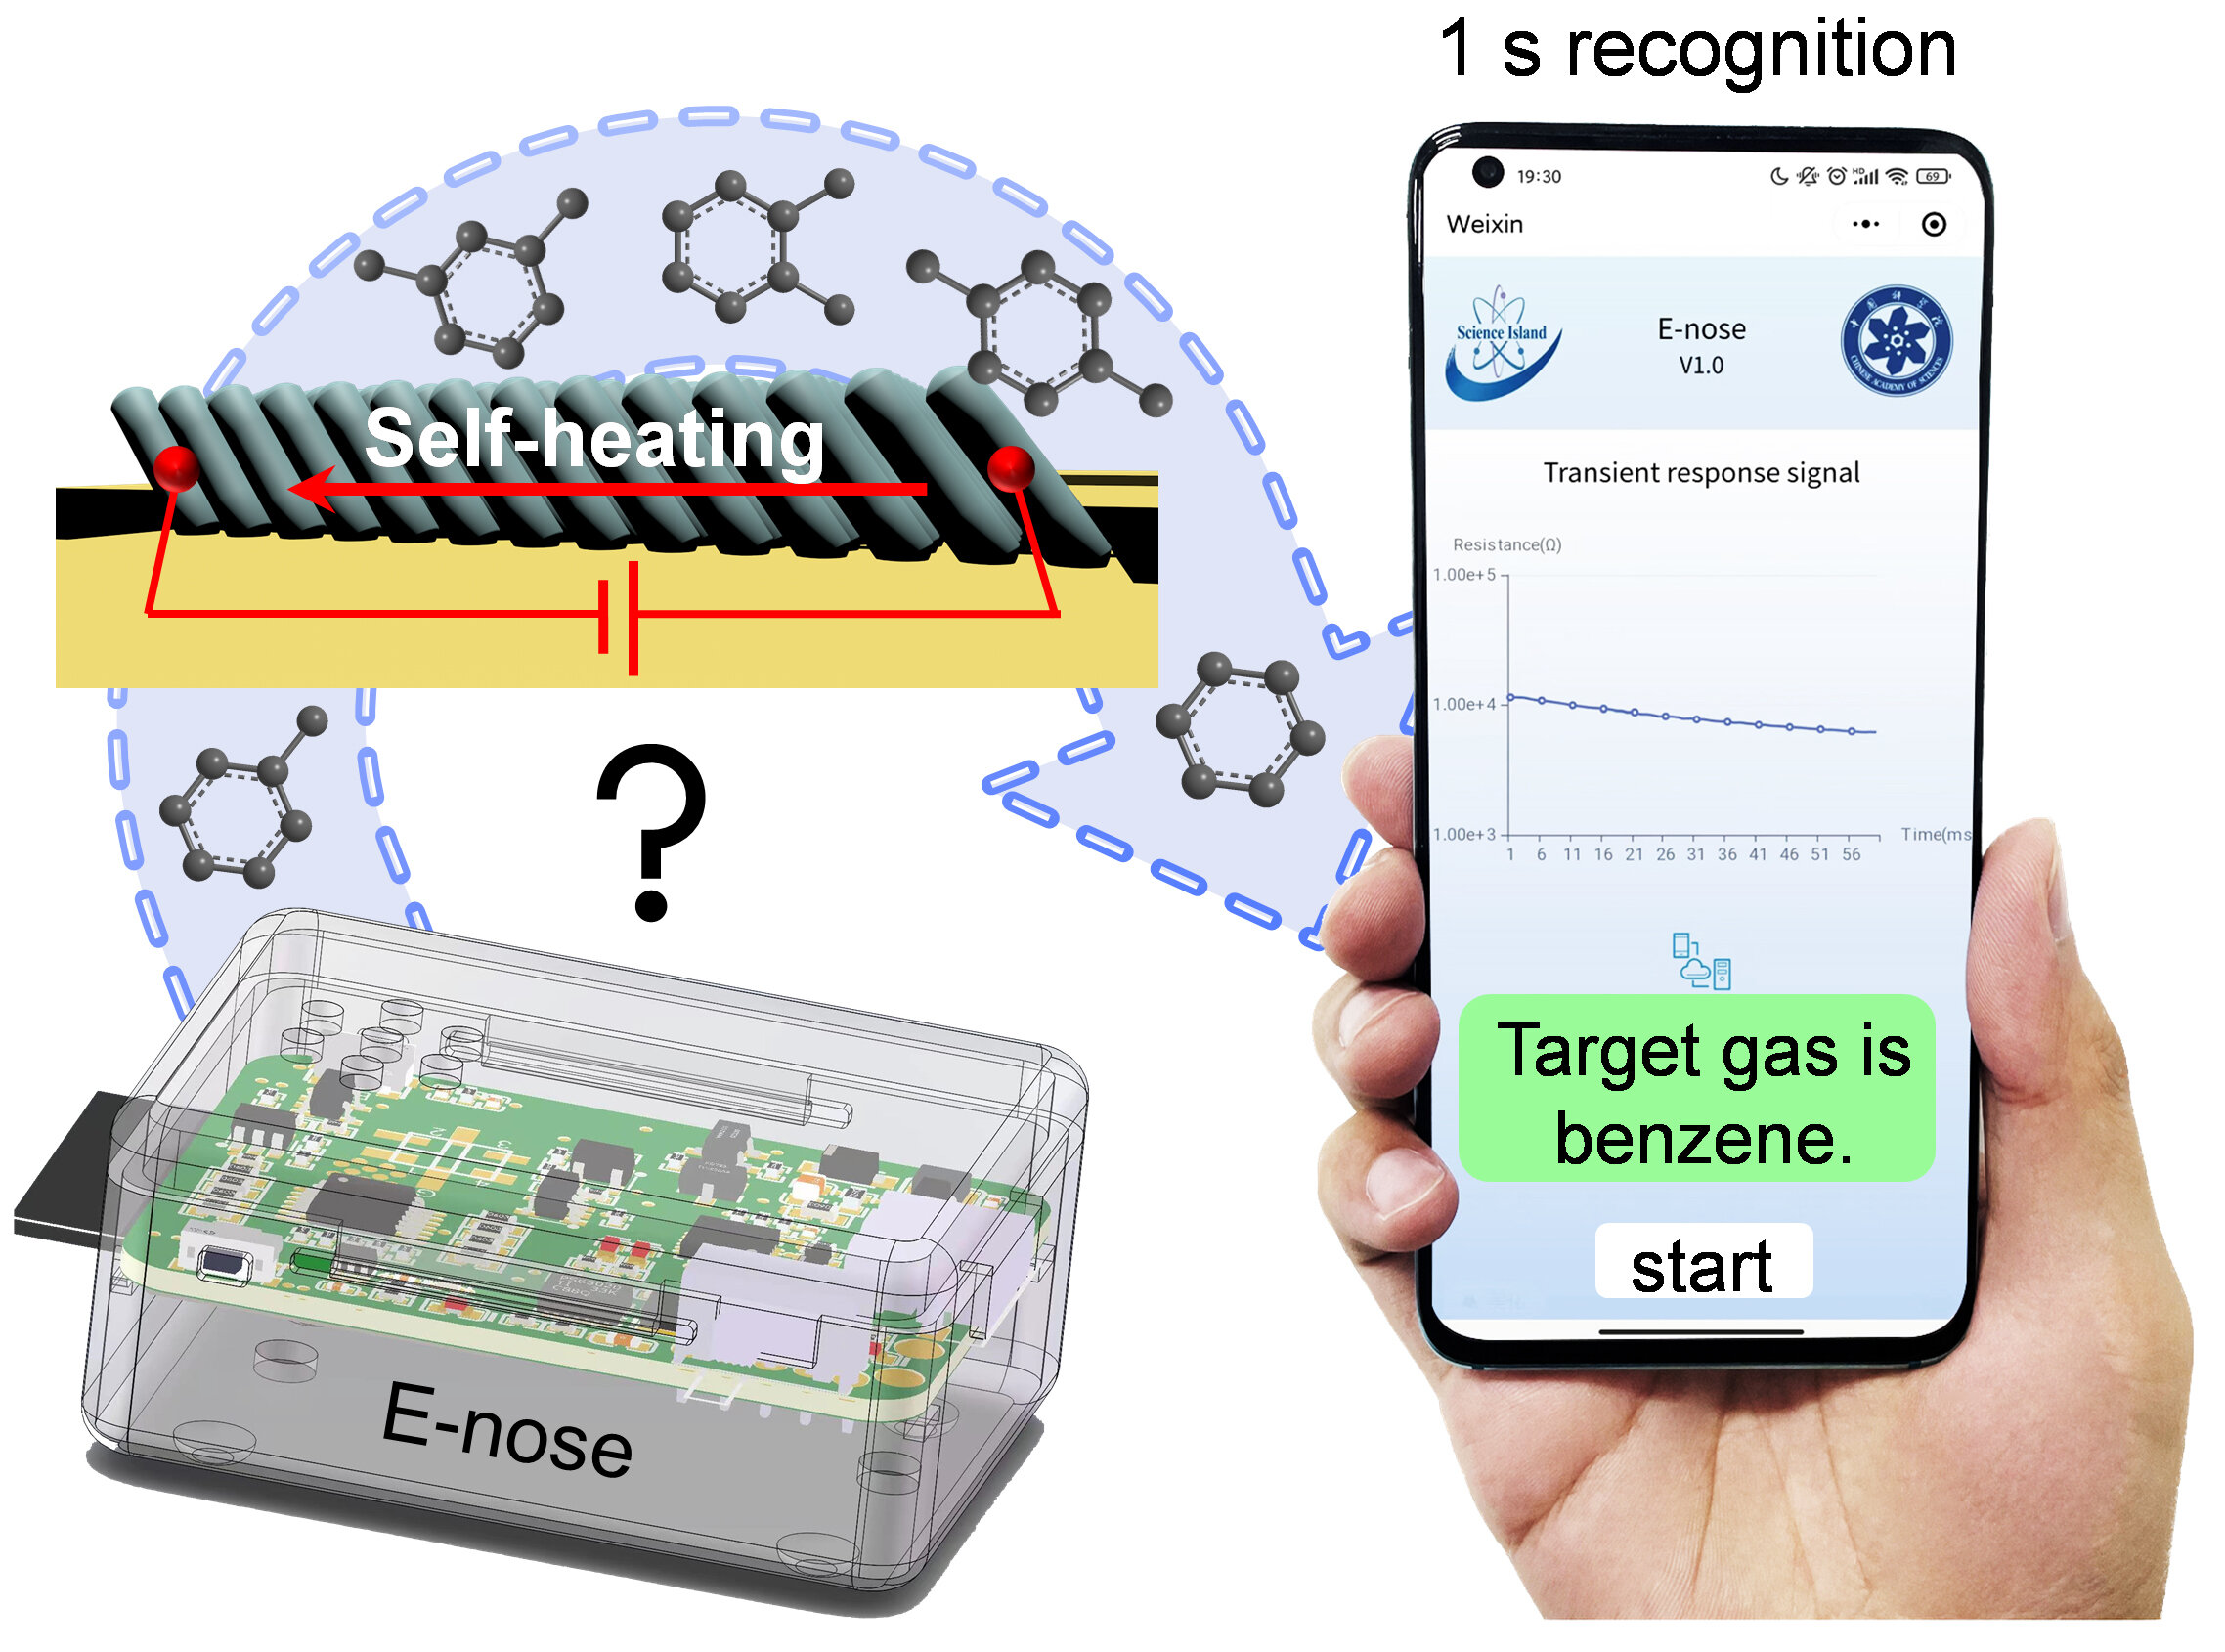 Smart e-nose uses self-heating temperature modulation to enable rapid identification of gas molecules